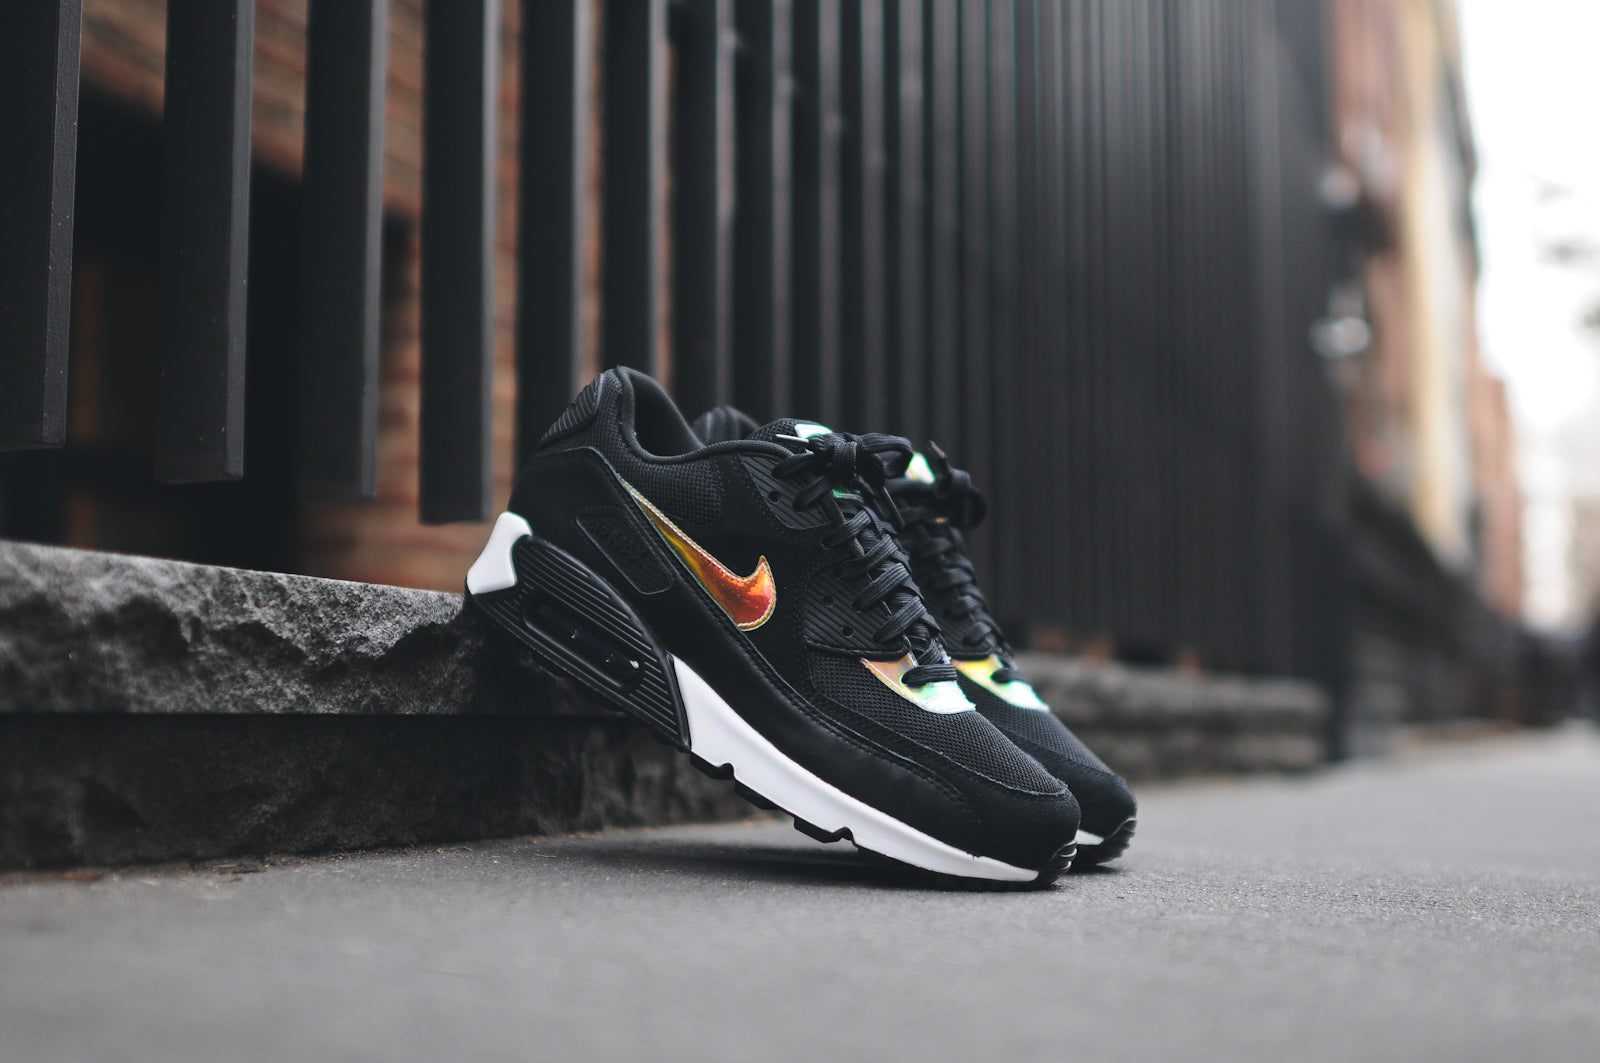 nike air max black with gold swoosh